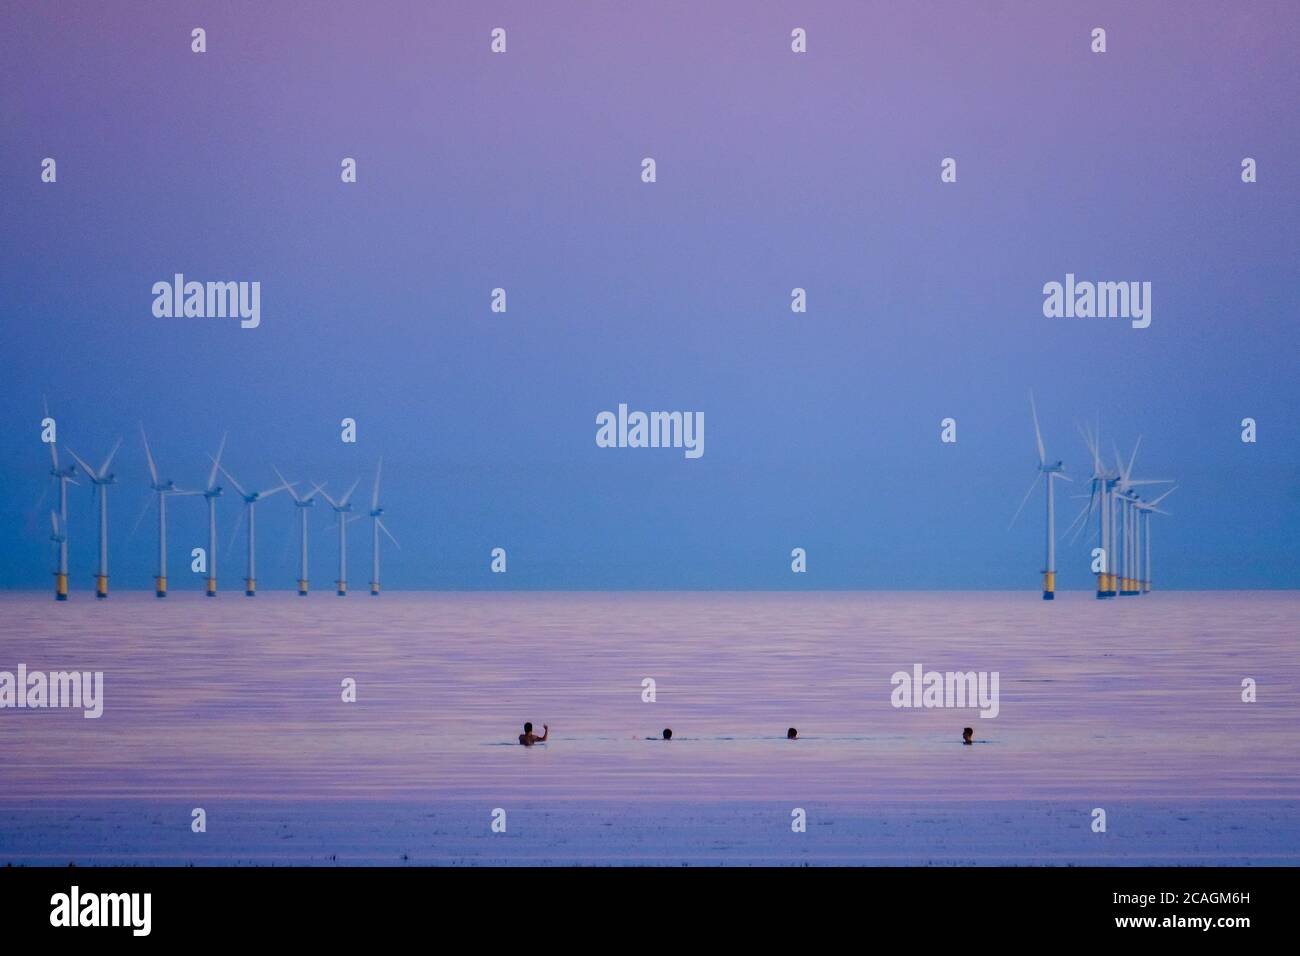 Worthing Beach, Worthing, UK. 6th Aug, 2020. People swim in the calm sea as the sun sets casting a warm glow on a warm summer evening. Rampion Wind Farm can be seen in the background, 13km-16km off shore. Picture by Credit: Julie Edwards/Alamy Live News Stock Photo